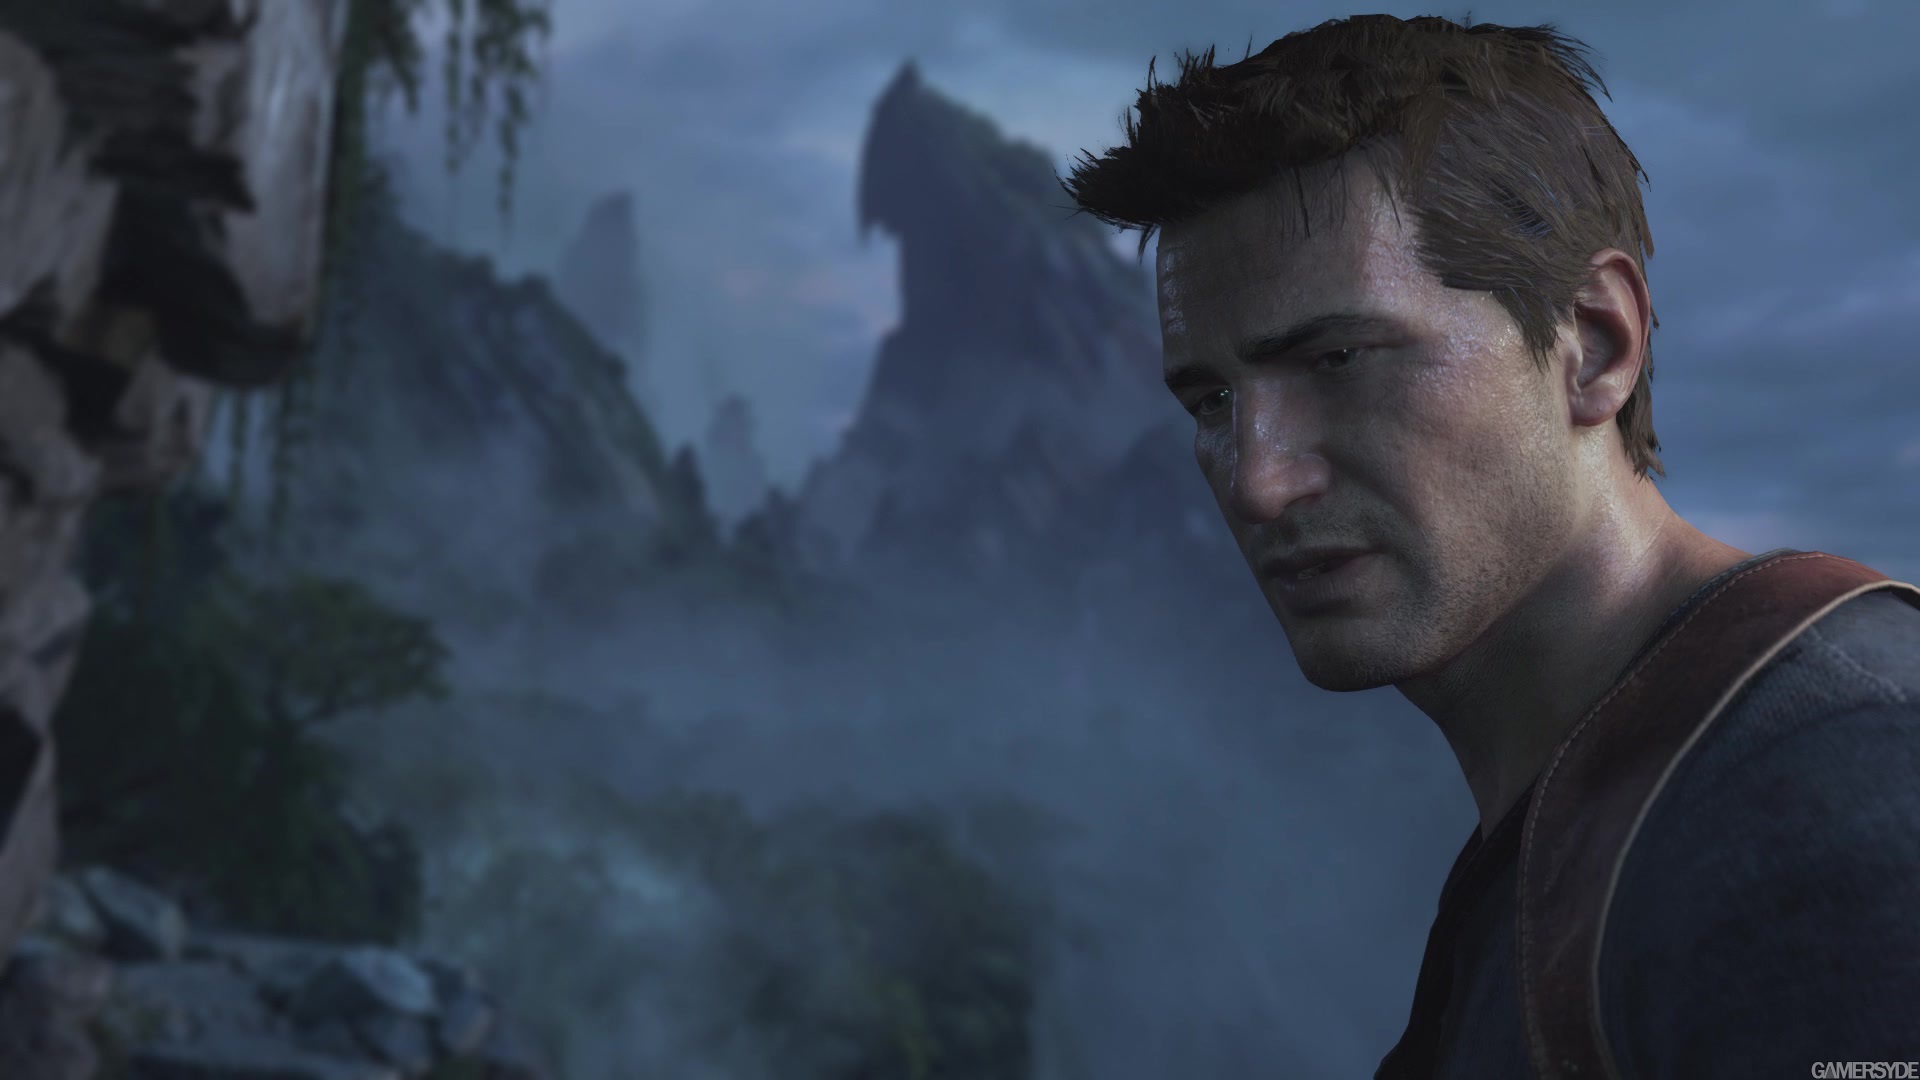 image_uncharted_4_a_thief_s_end-27127-2995_0002.jpg